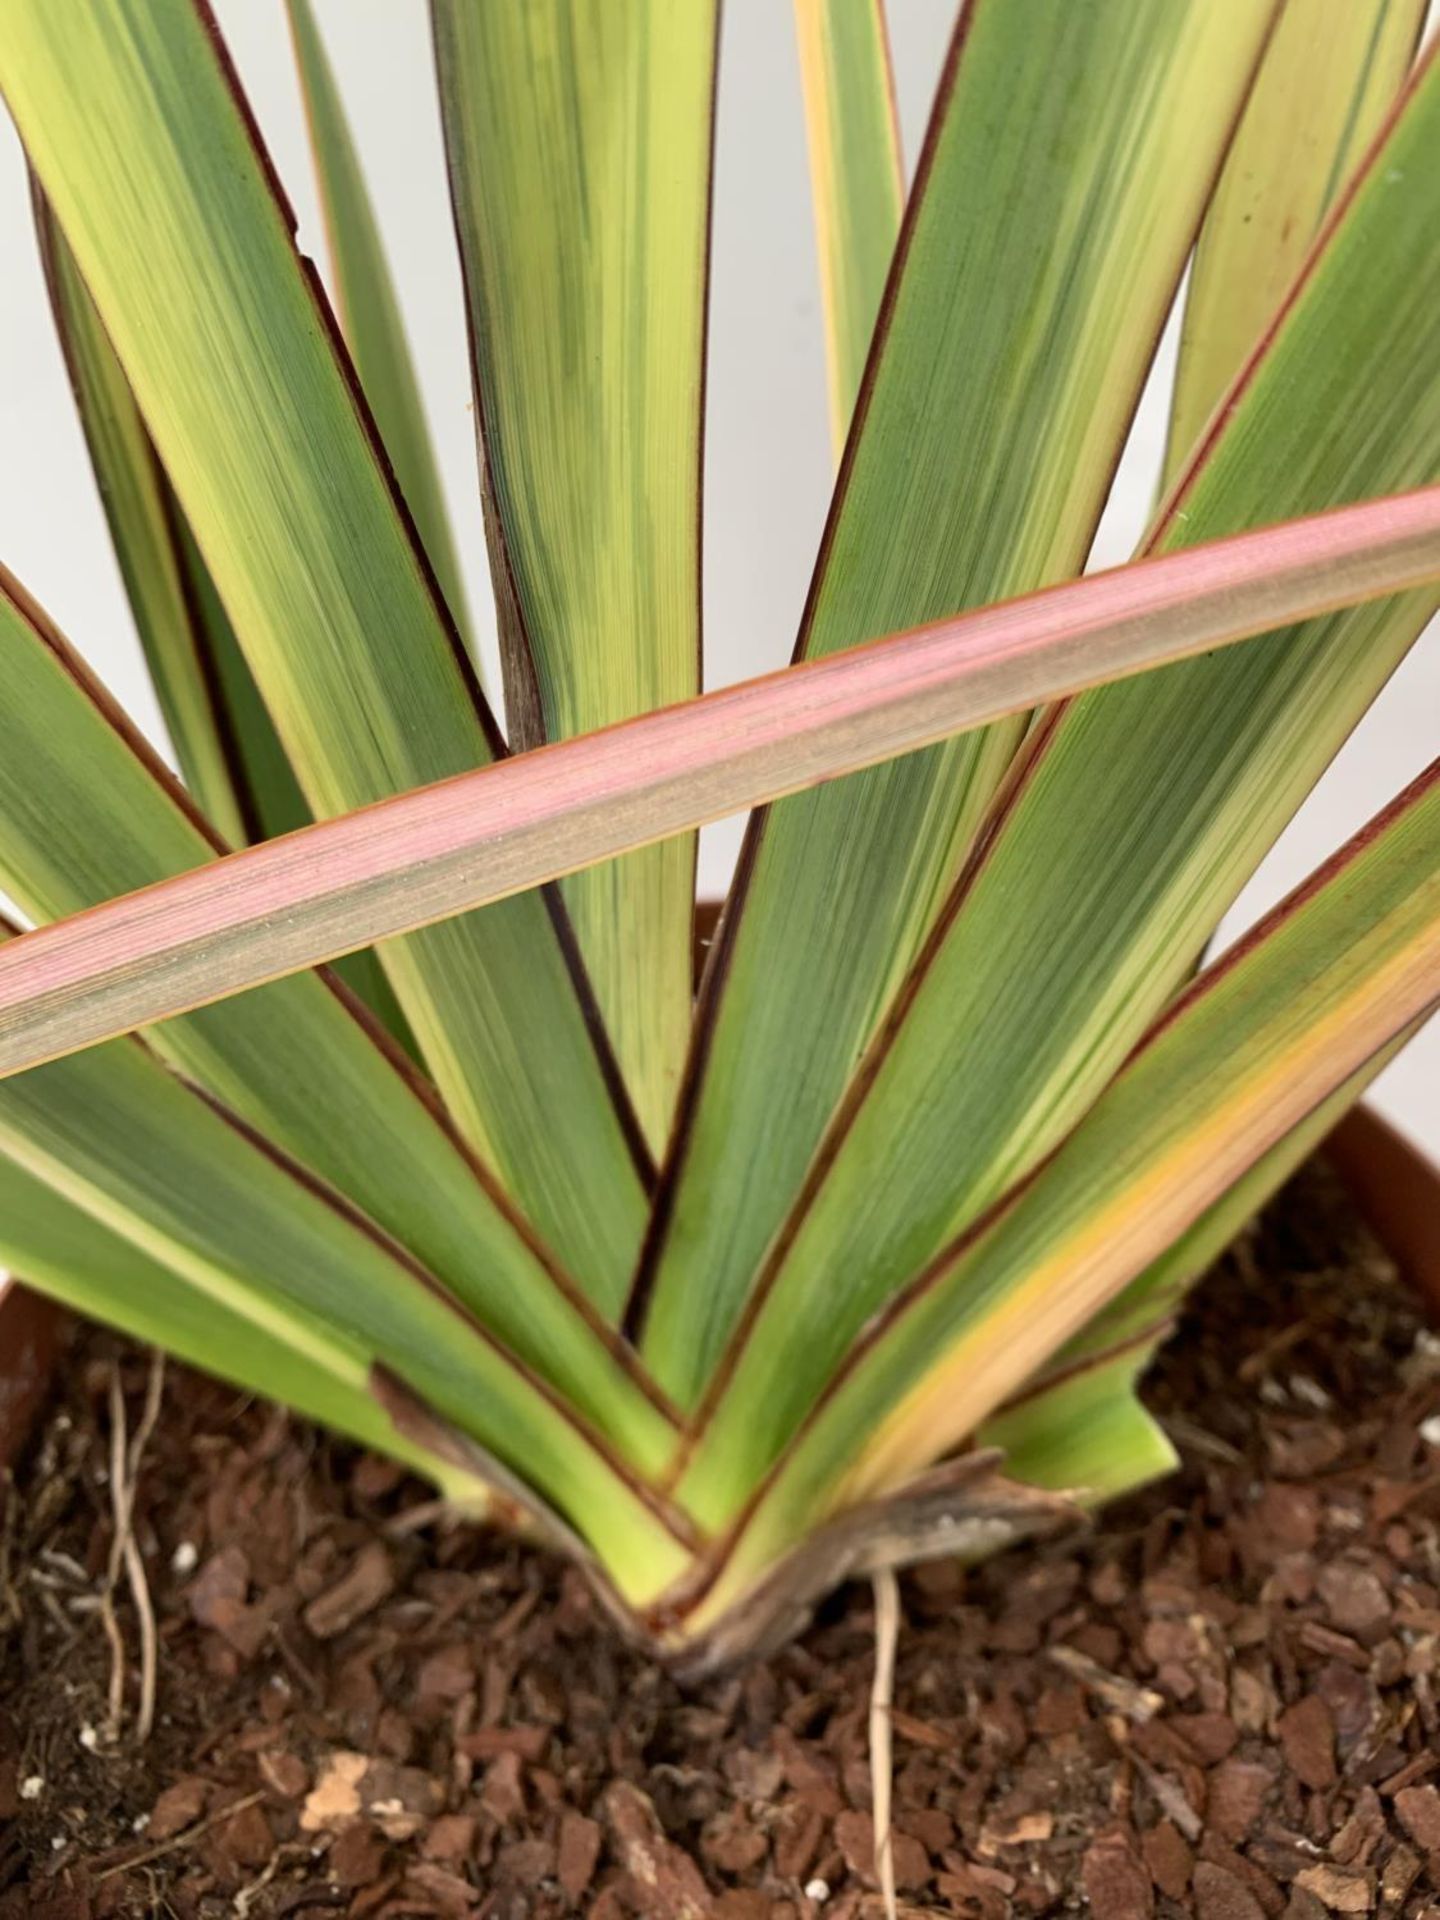 TWO PHORMIUM TENAX 'RAINBOW QUEEN' IN 3 LTR POTS APPROX 1M IN HEIGHT PLUS VAT TO BE SOLD FOR THE TWO - Image 6 of 12